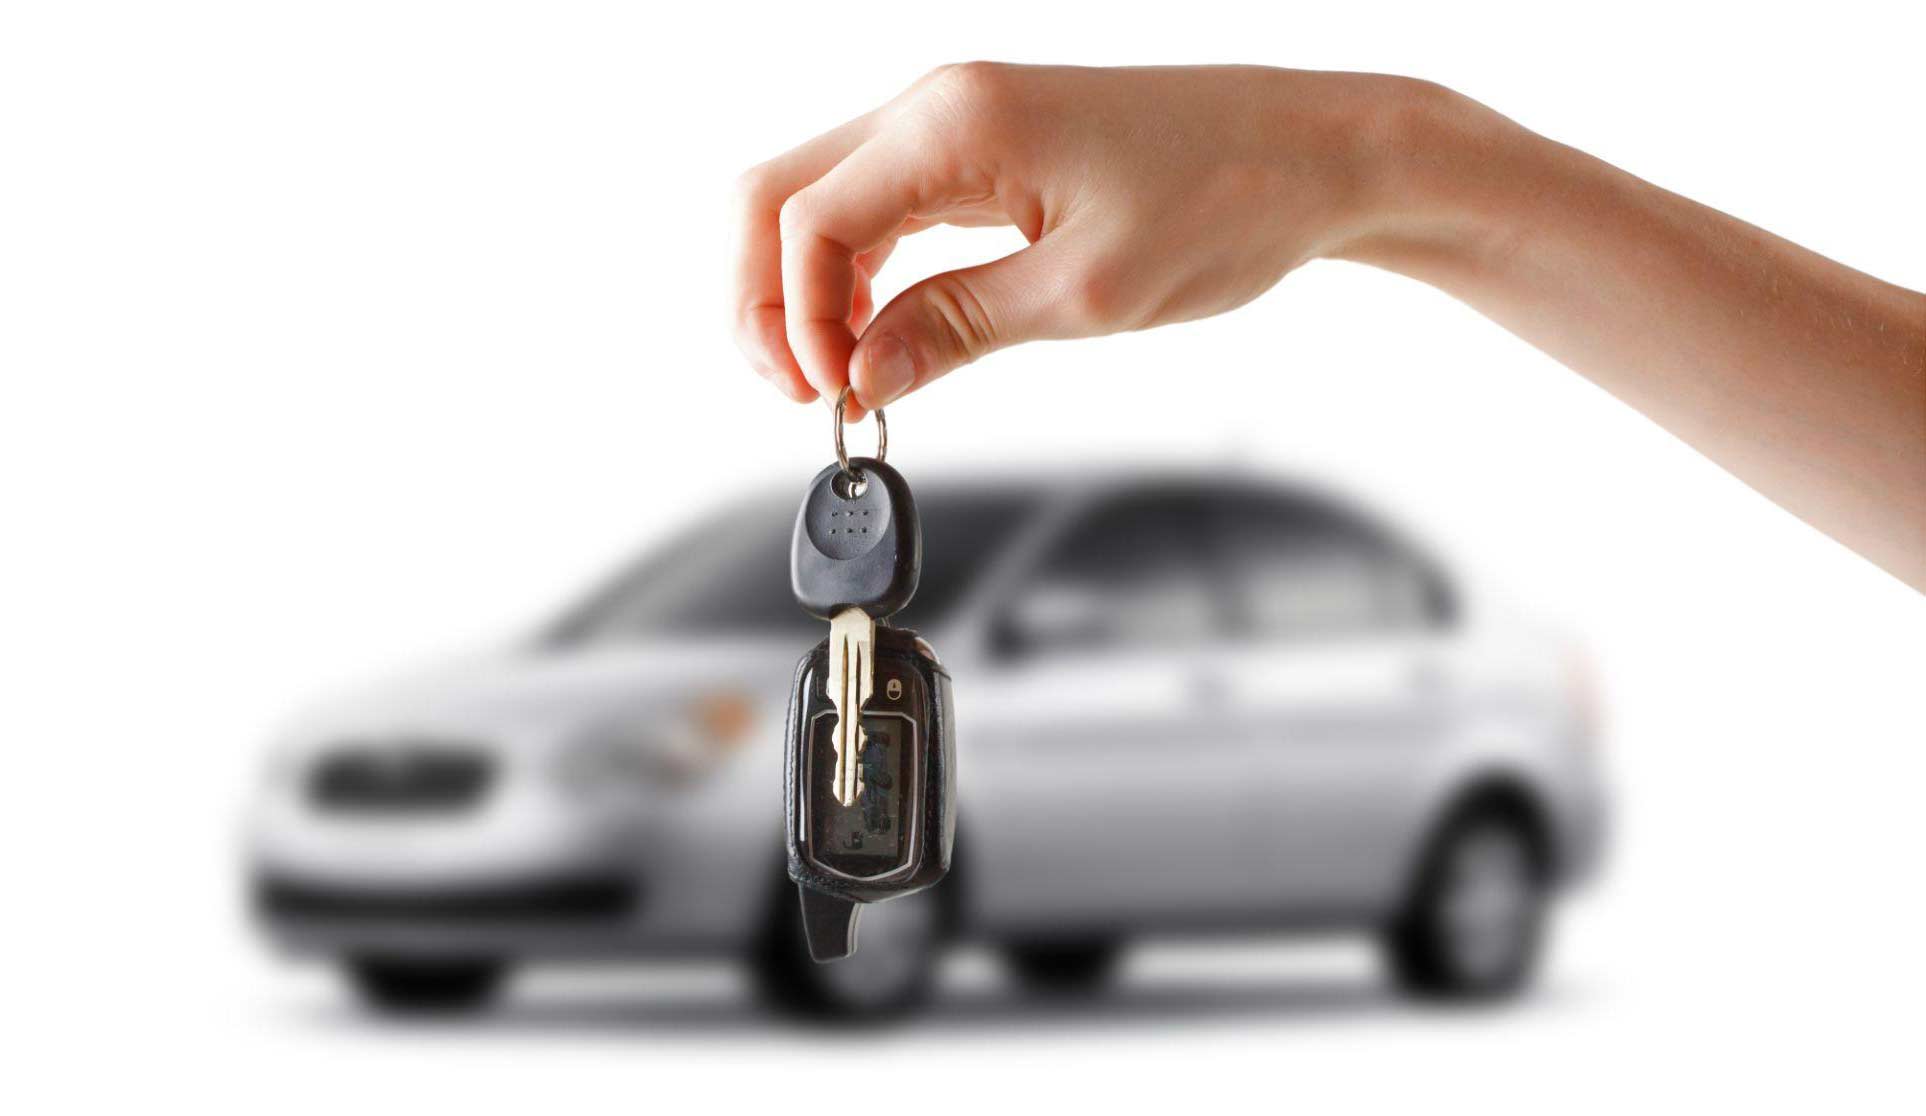 Purchasing A Car: The Key Costs To Consider